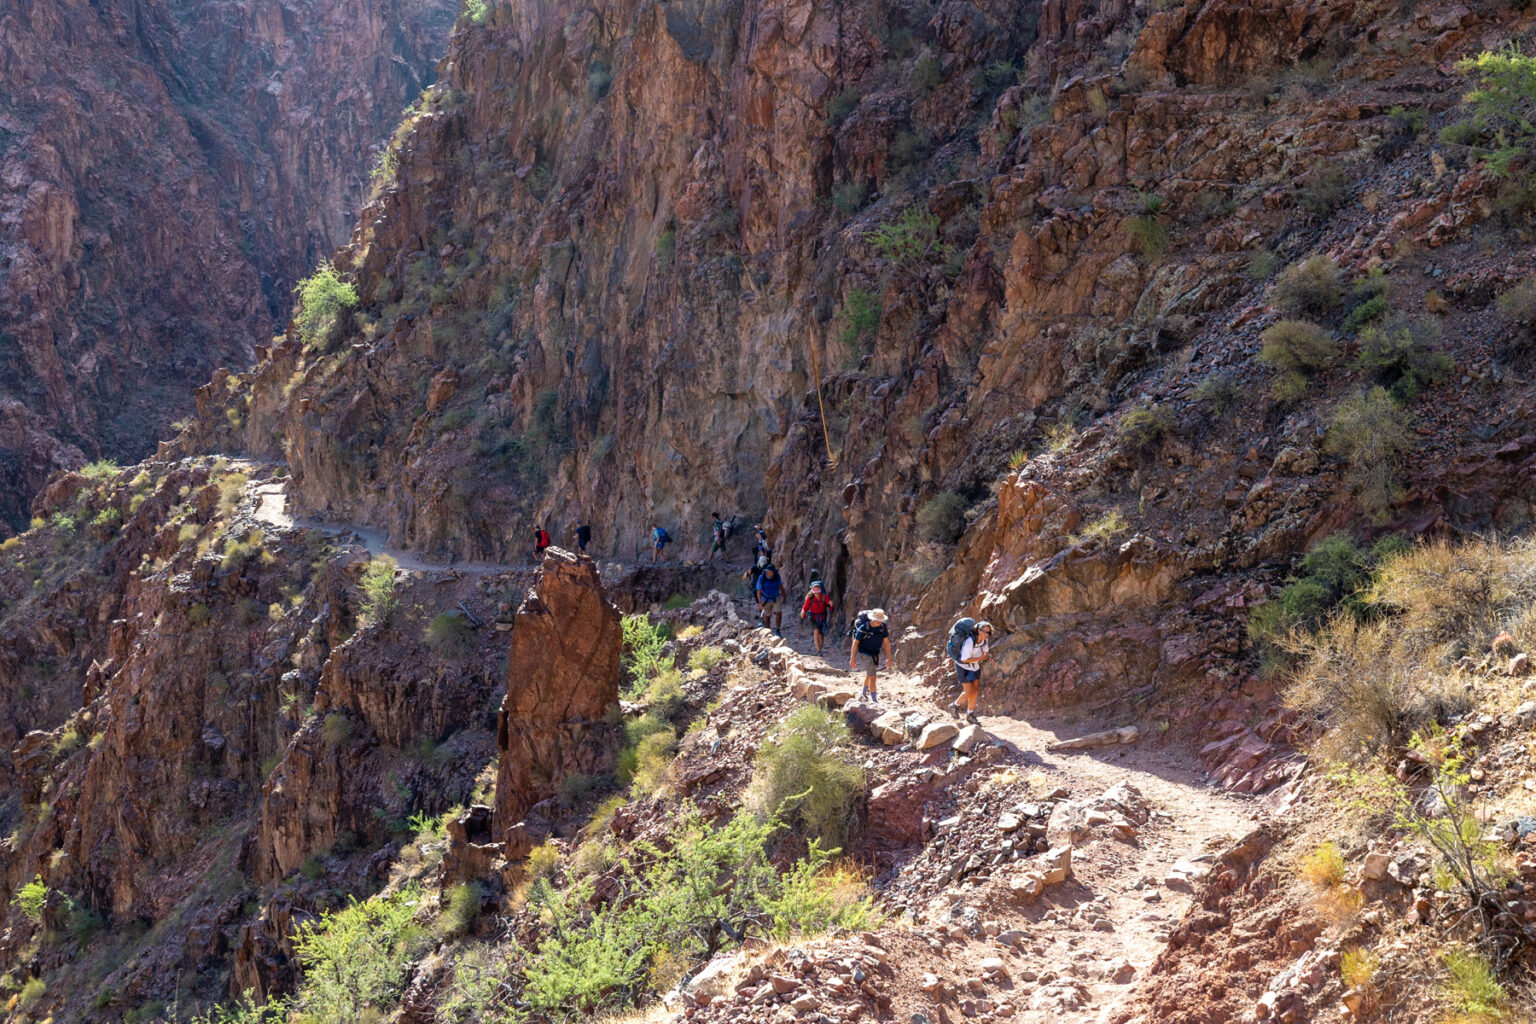 A group of hikers with large backpacks ascend the Bright Angel Trail in Grand Canyon